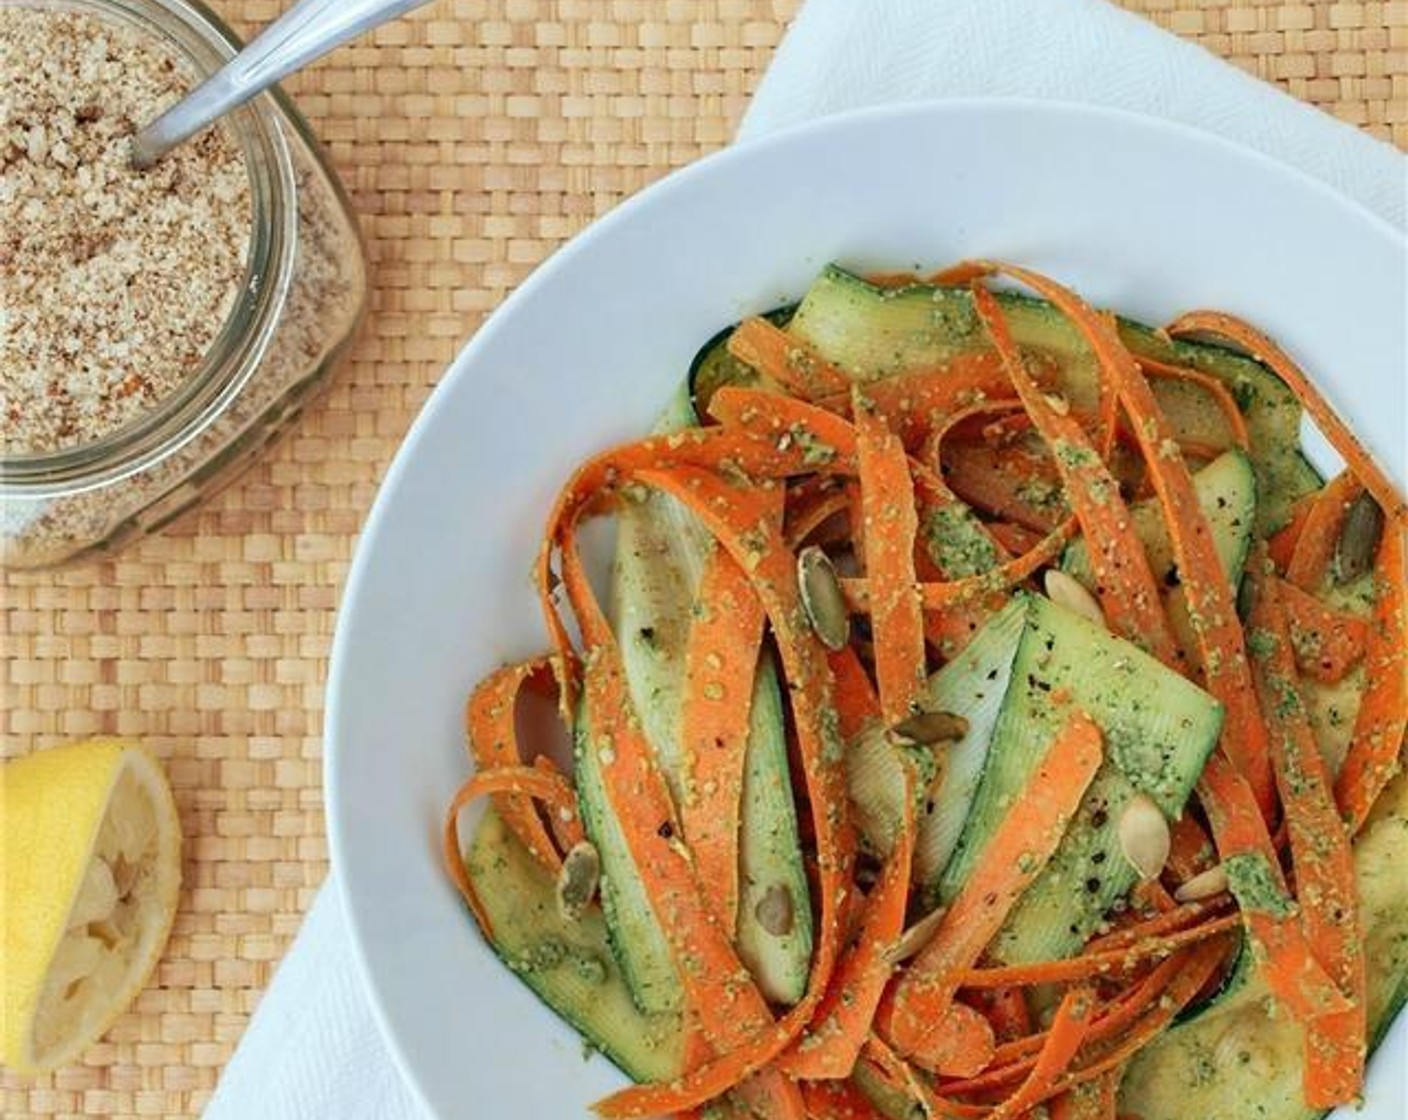 Courgette Ribbons with Almond Pesto Recipe